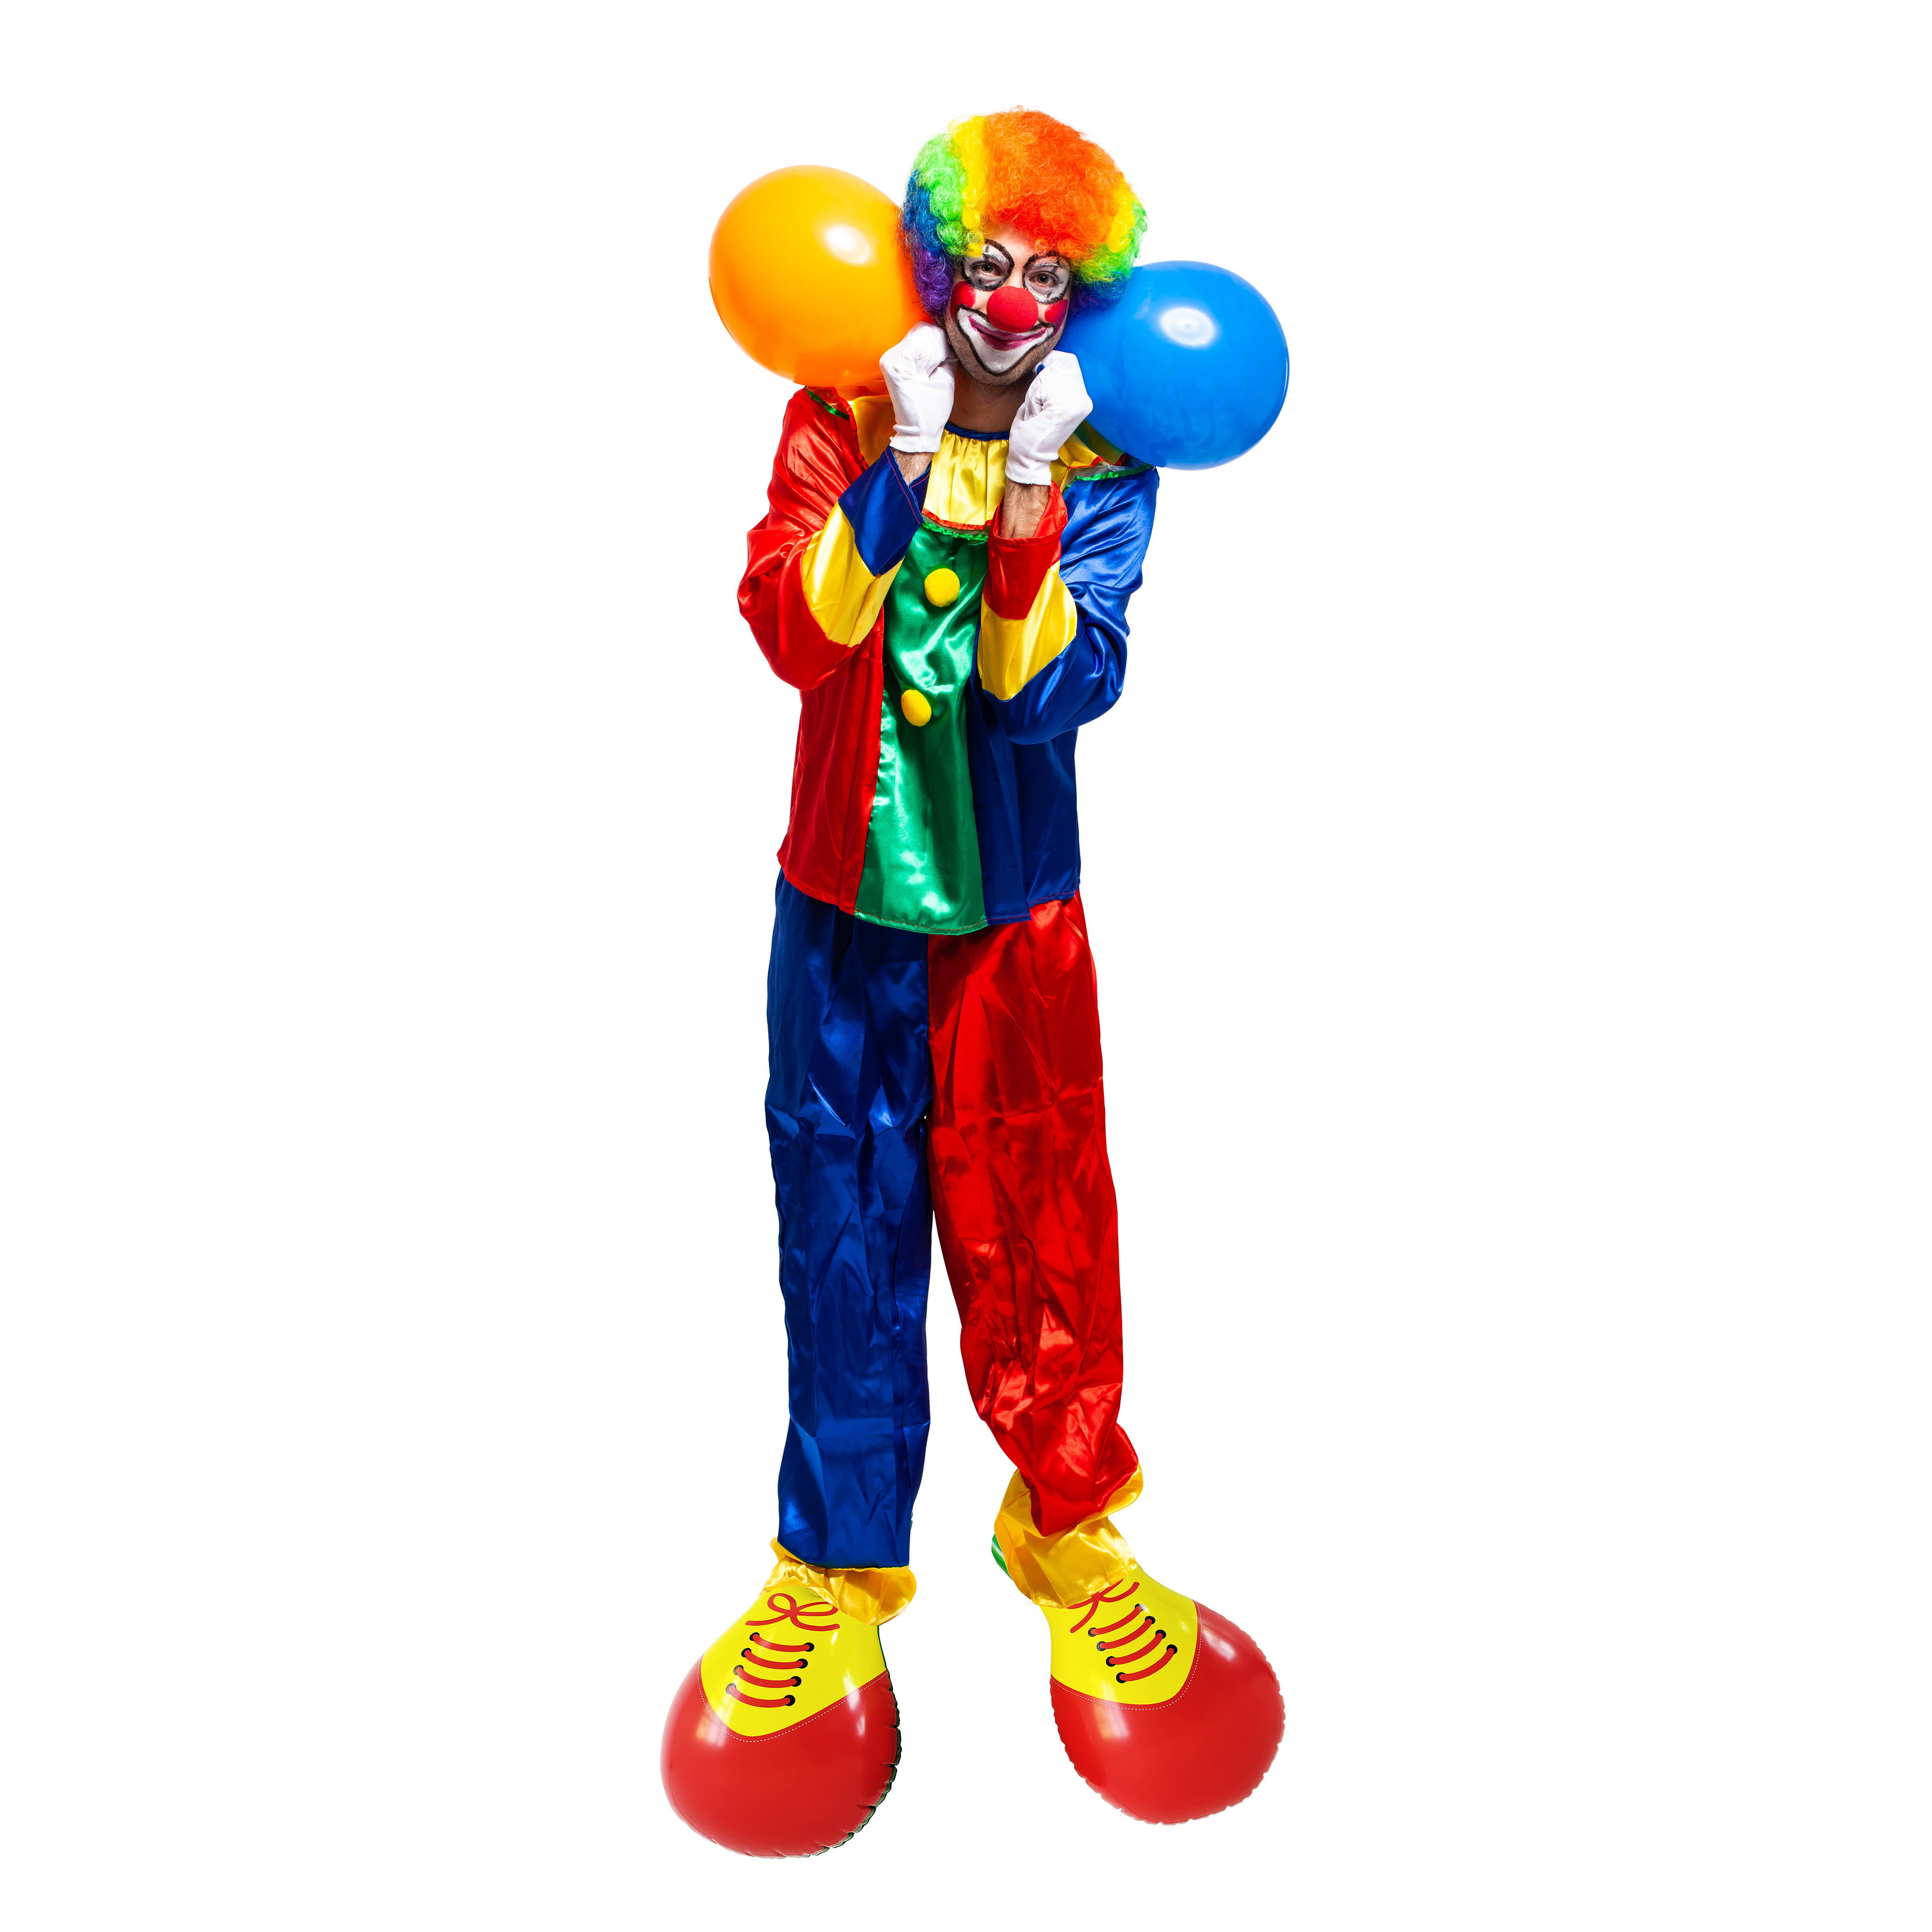 Inflatable Clown Shoes – The Diabolical Gift People